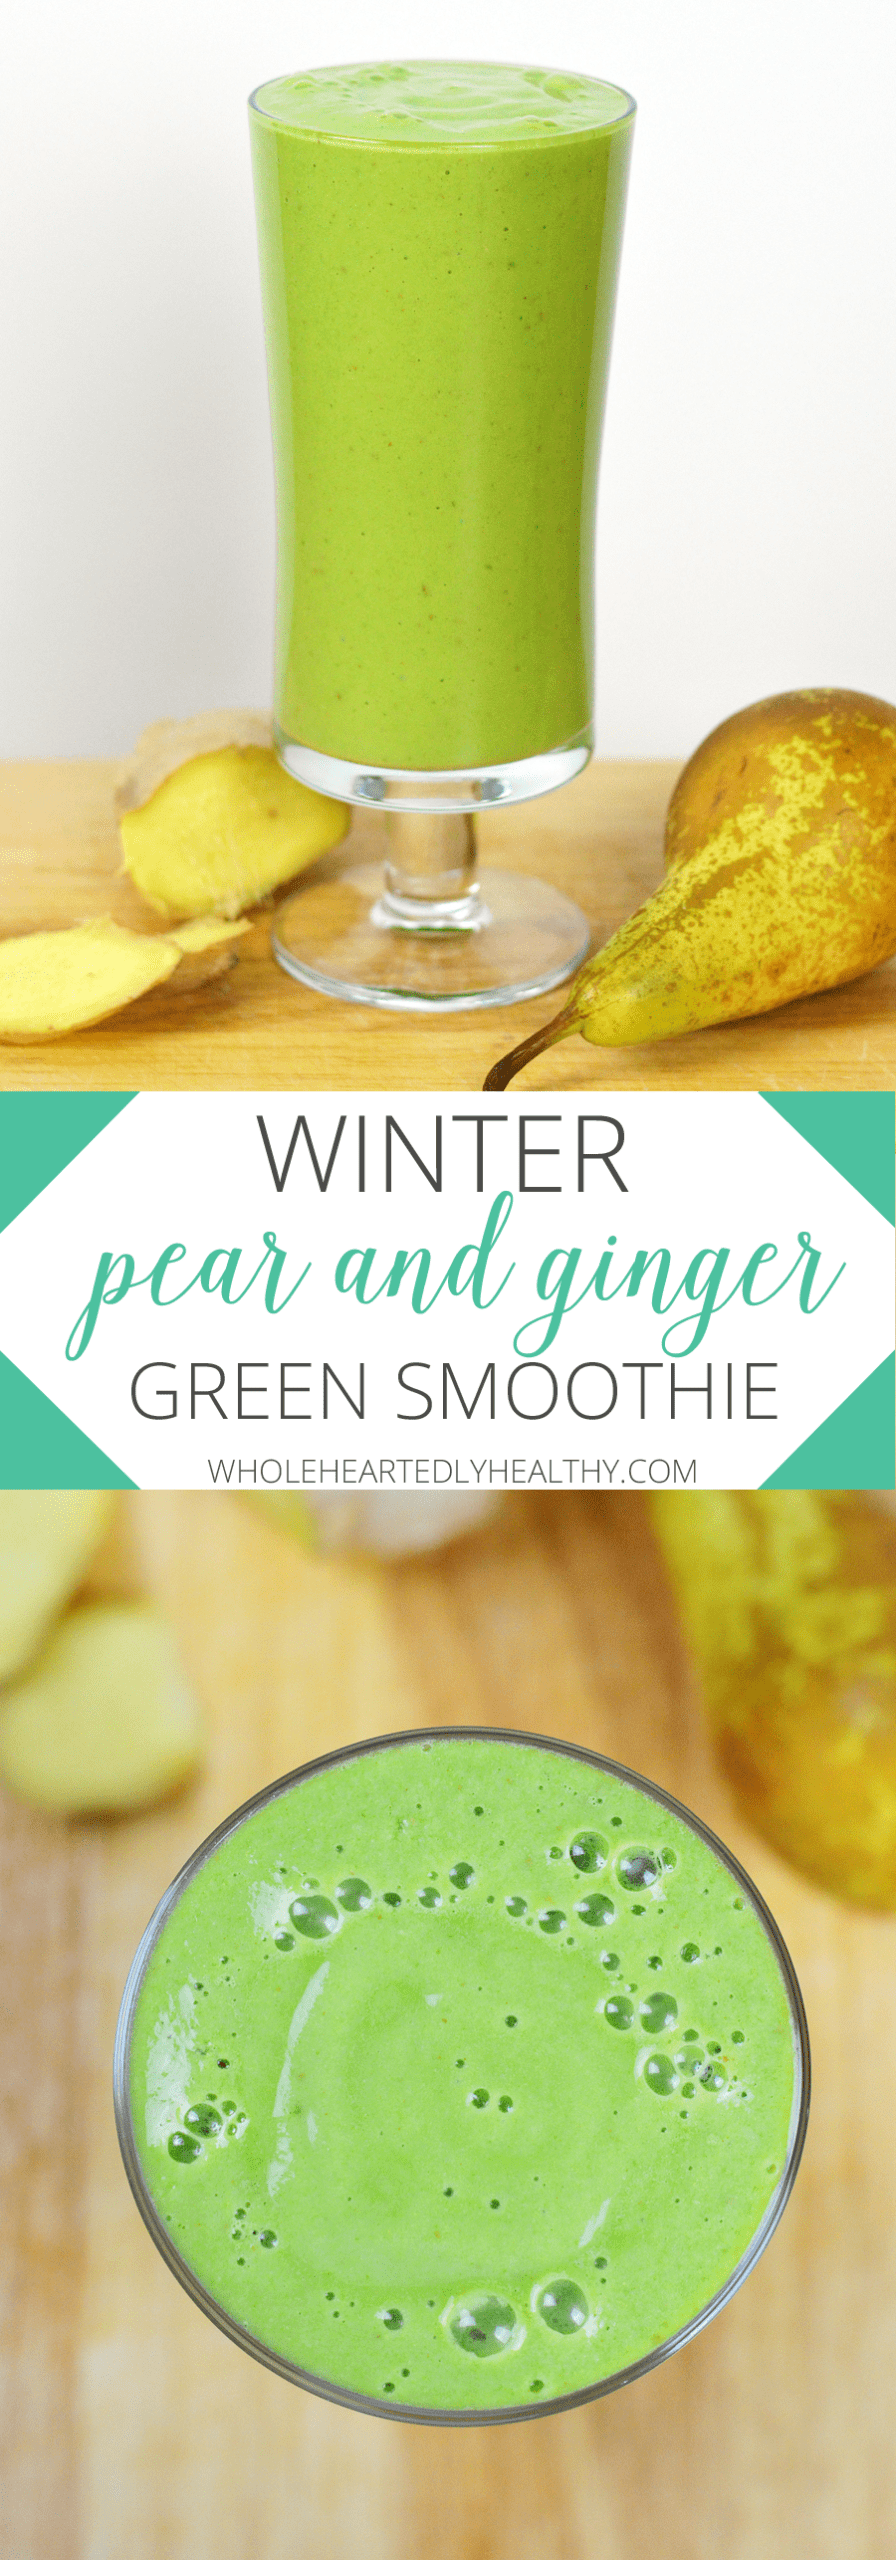 Winter pear and ginger green smoothie